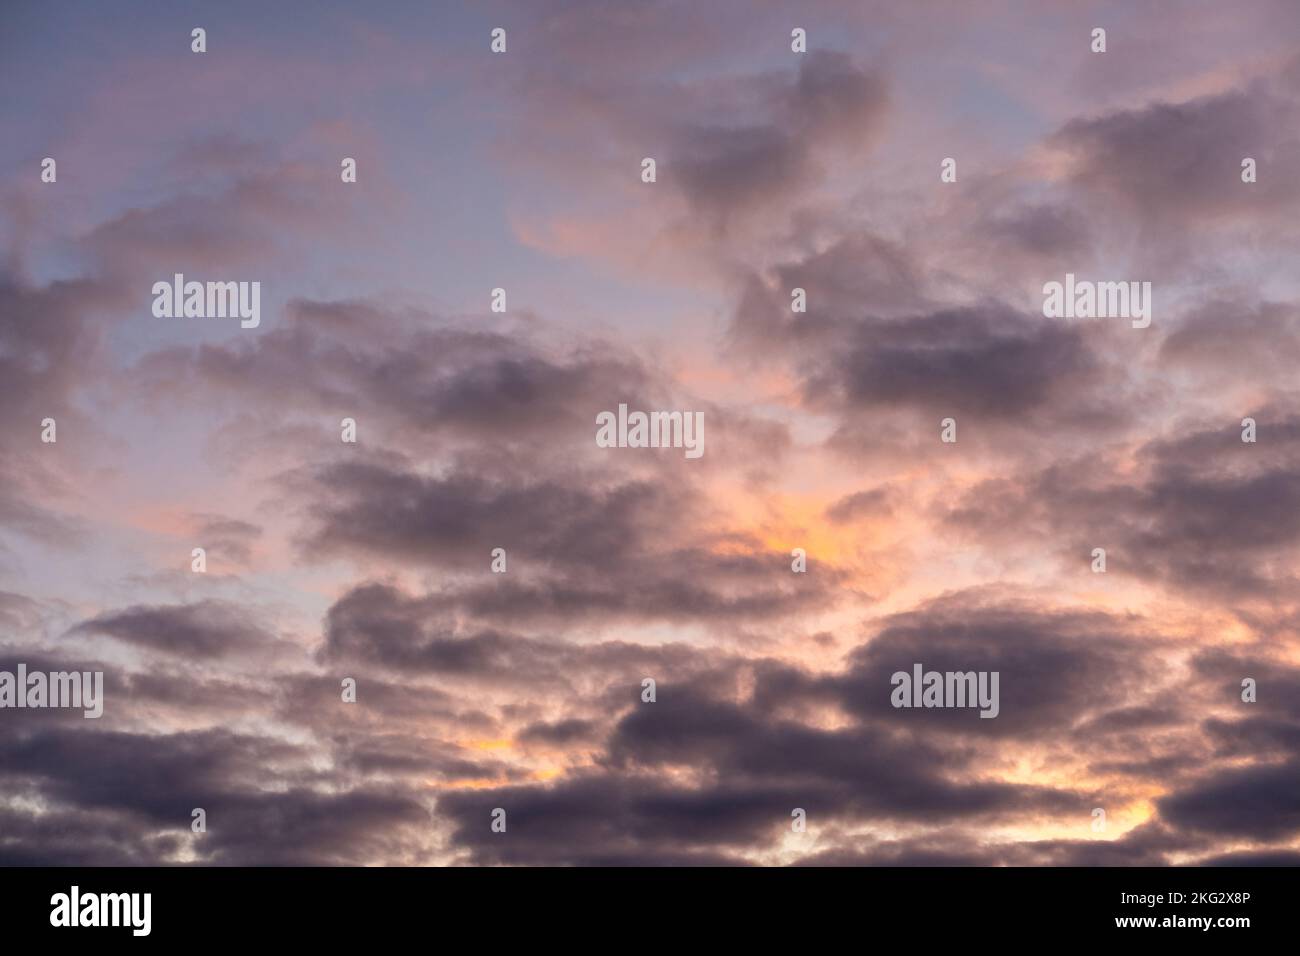 Landscape photo of big, pink cumulonimbus clouds in a stormy sky at sunset. Moody sunset or sunrise sky. High contrasts in a stormy sky. mammatuses Stock Photo